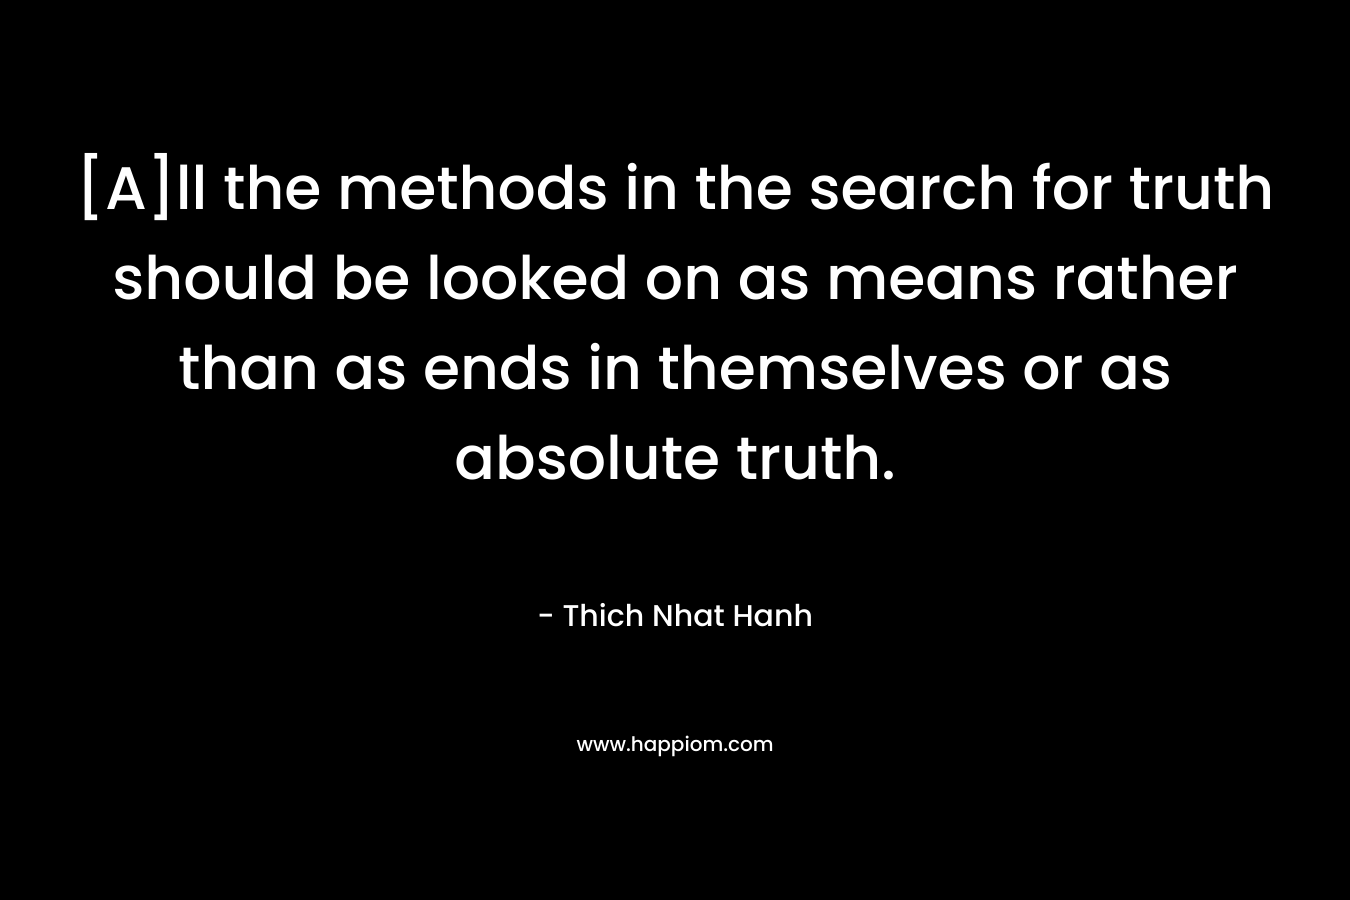 [A]ll the methods in the search for truth should be looked on as means rather than as ends in themselves or as absolute truth. – Thich Nhat Hanh